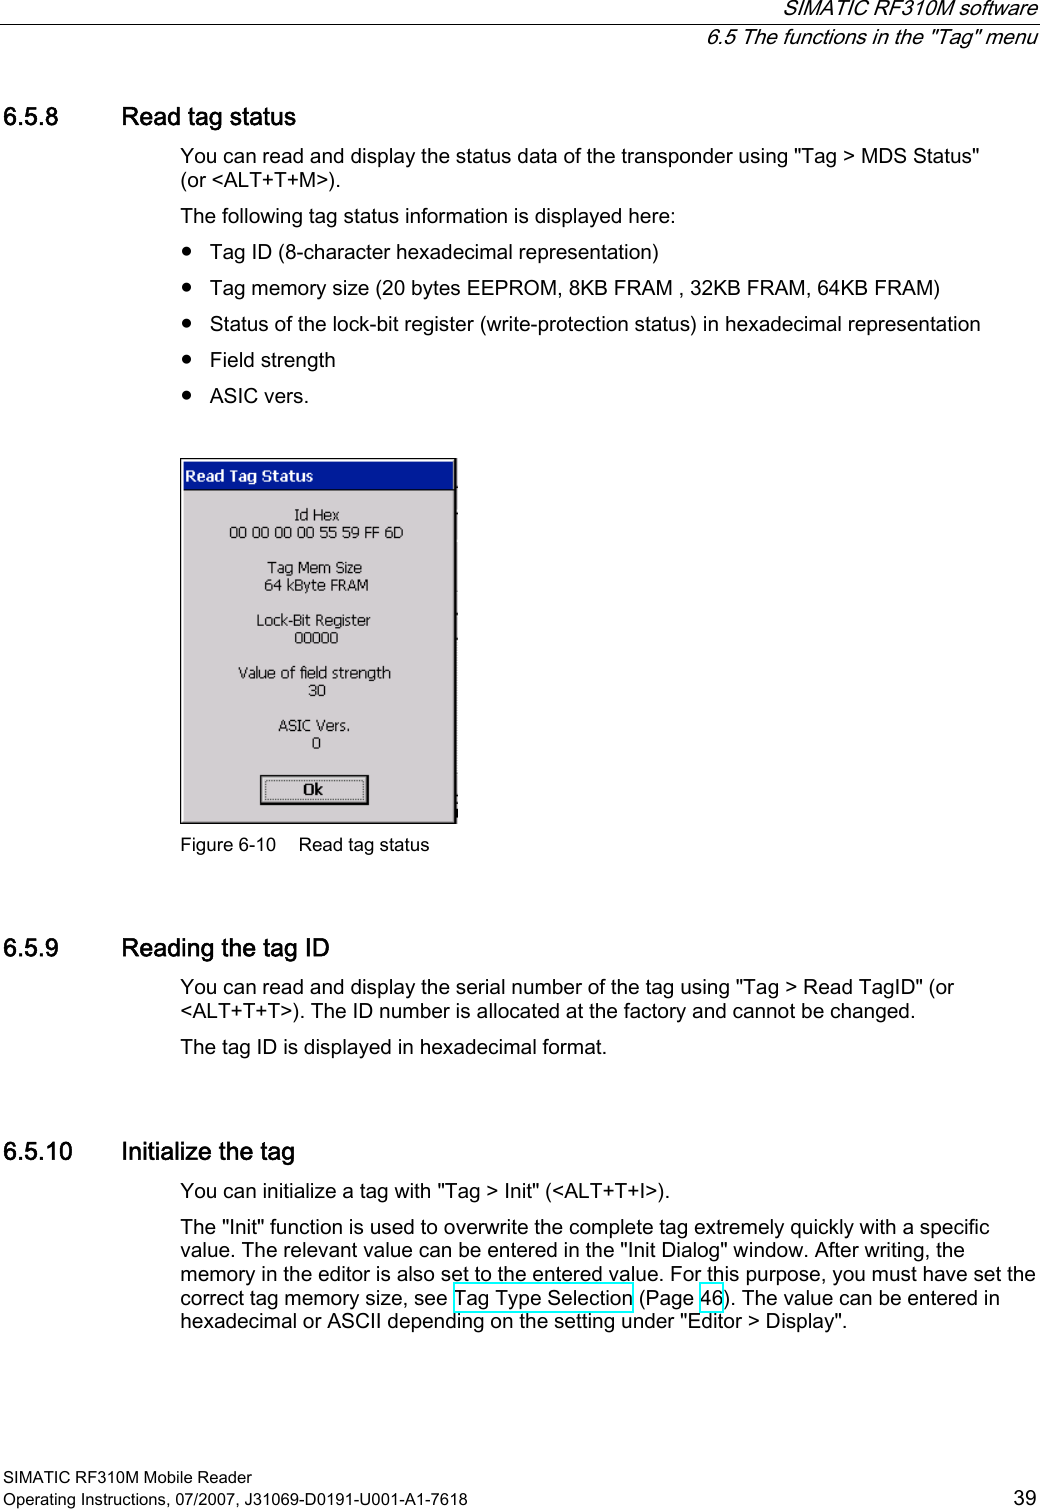  SIMATIC RF310M software  6.5 The functions in the &quot;Tag&quot; menu SIMATIC RF310M Mobile Reader Operating Instructions, 07/2007, J31069-D0191-U001-A1-7618  39 6.5.8 Read tag status You can read and display the status data of the transponder using &quot;Tag &gt; MDS Status&quot;  (or &lt;ALT+T+M&gt;).  The following tag status information is displayed here: ●  Tag ID (8-character hexadecimal representation) ●  Tag memory size (20 bytes EEPROM, 8KB FRAM , 32KB FRAM, 64KB FRAM) ●  Status of the lock-bit register (write-protection status) in hexadecimal representation ●  Field strength ●  ASIC vers.   Figure 6-10  Read tag status 6.5.9 Reading the tag ID You can read and display the serial number of the tag using &quot;Tag &gt; Read TagID&quot; (or &lt;ALT+T+T&gt;). The ID number is allocated at the factory and cannot be changed.  The tag ID is displayed in hexadecimal format. 6.5.10 Initialize the tag You can initialize a tag with &quot;Tag &gt; Init&quot; (&lt;ALT+T+I&gt;). The &quot;Init&quot; function is used to overwrite the complete tag extremely quickly with a specific value. The relevant value can be entered in the &quot;Init Dialog&quot; window. After writing, the memory in the editor is also set to the entered value. For this purpose, you must have set the correct tag memory size, see Tag Type Selection (Page 46). The value can be entered in hexadecimal or ASCII depending on the setting under &quot;Editor &gt; Display&quot;. 